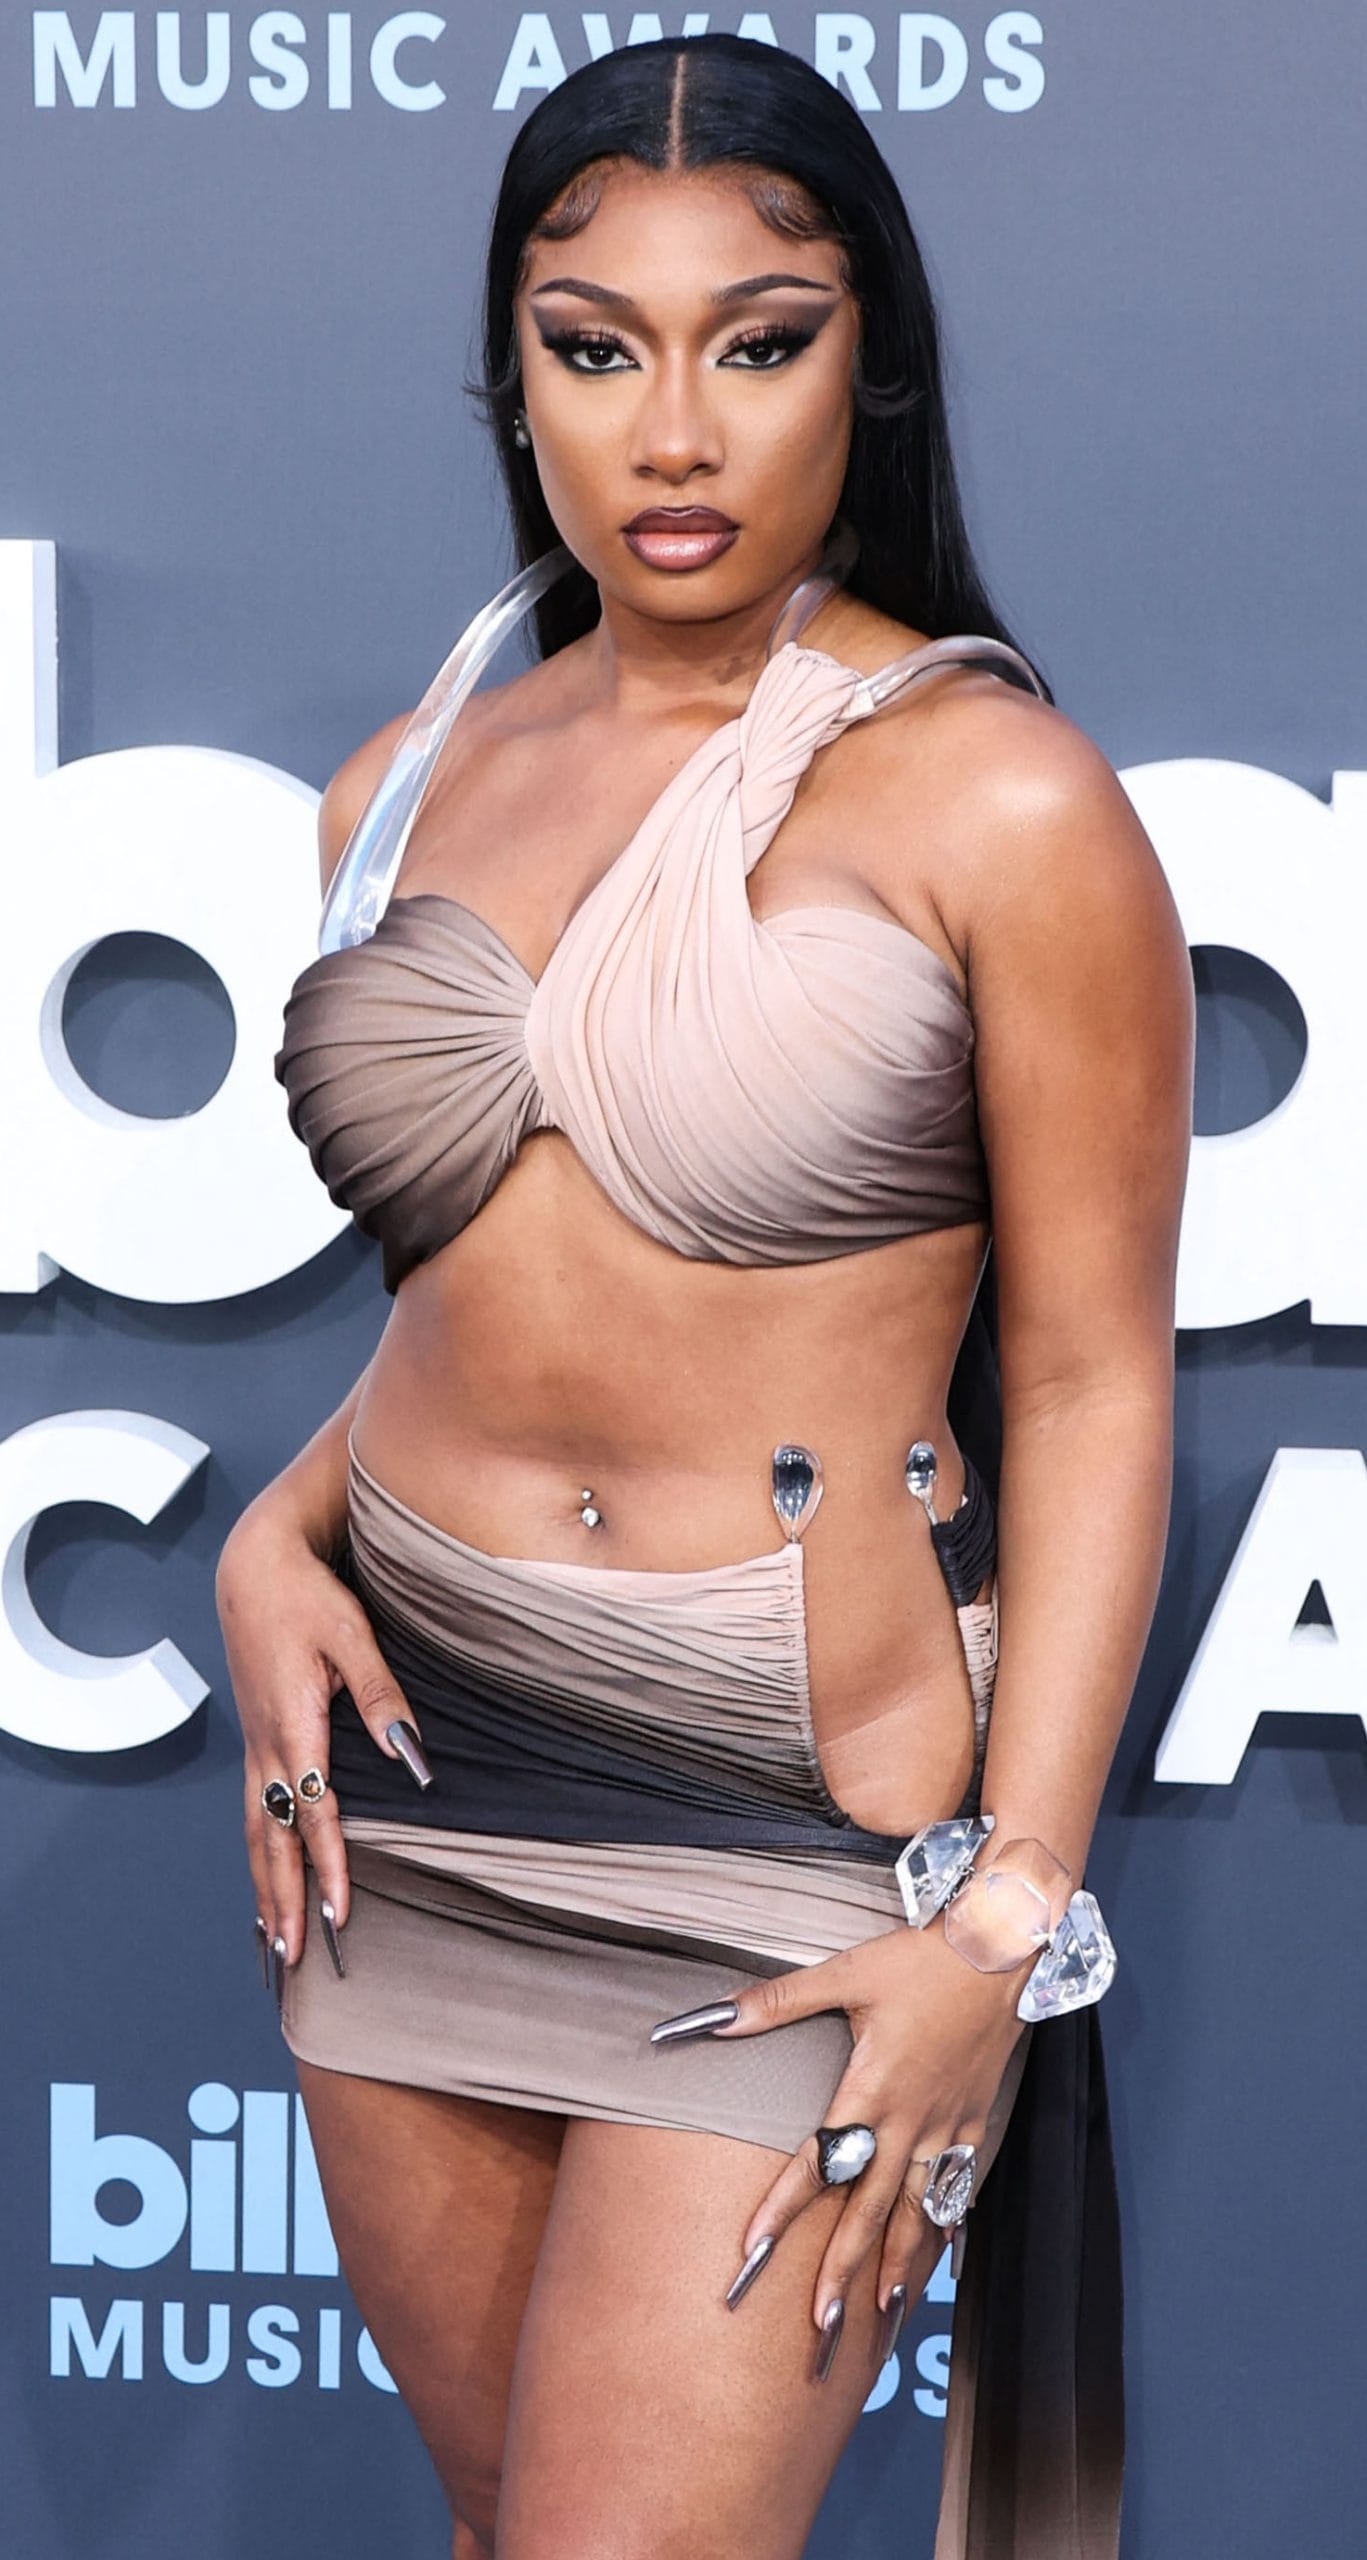 Megan Thee Stallion wore a black and beige Mugler two-piece set